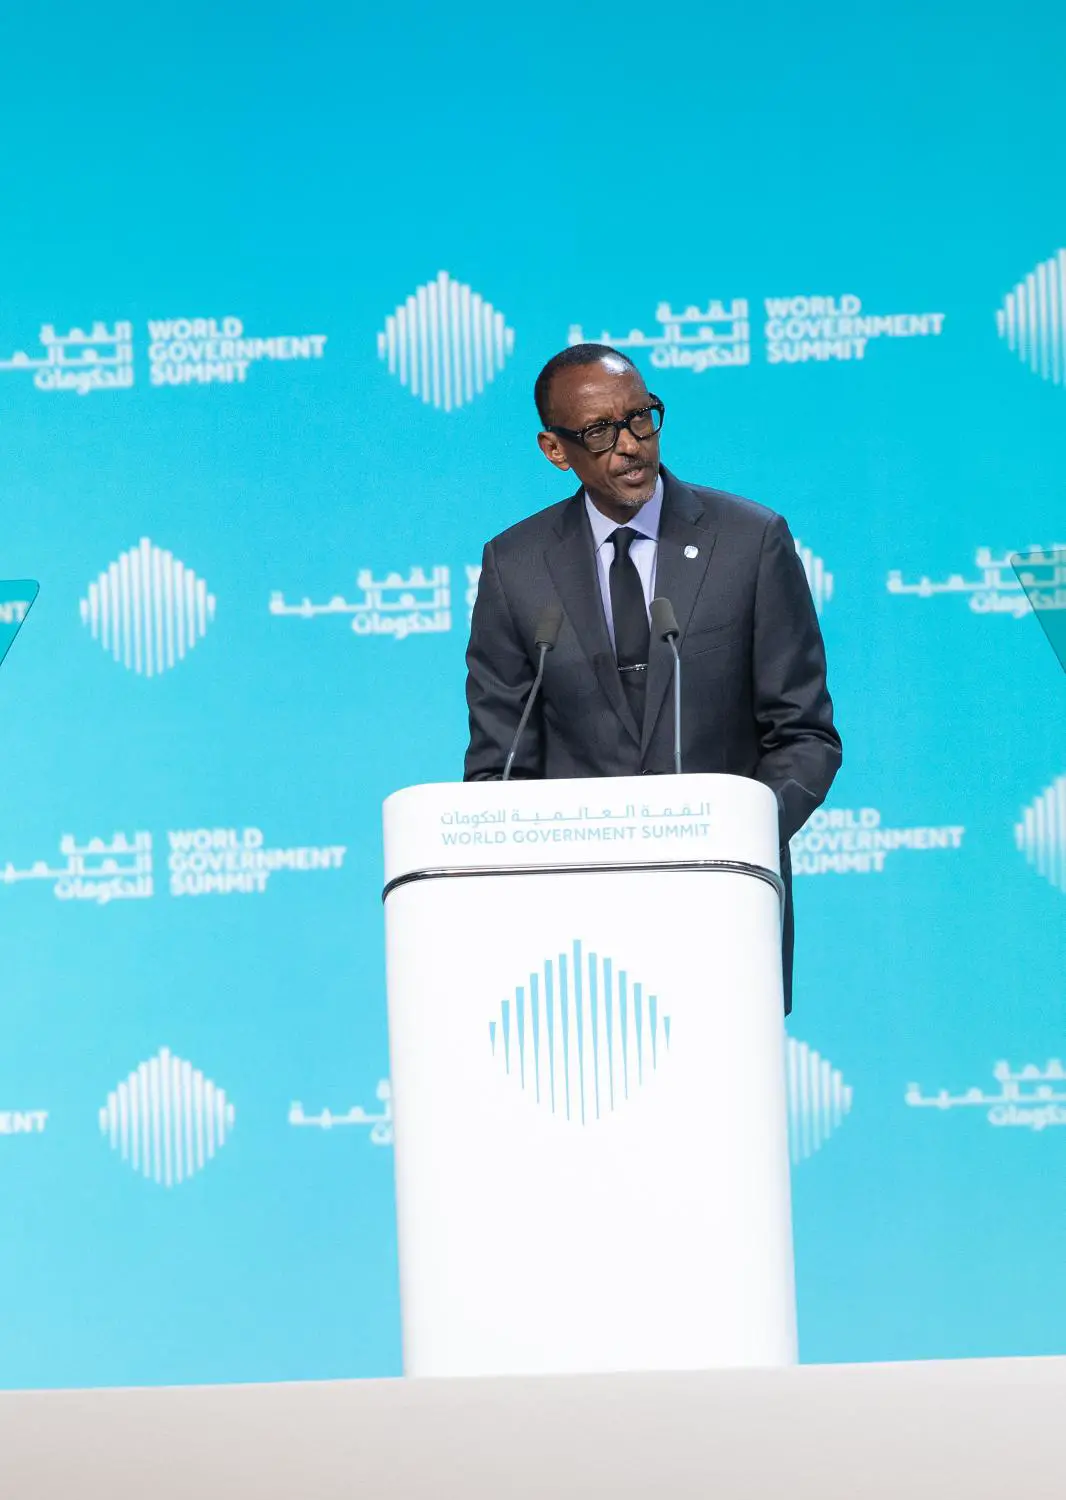 Unlimited potential. Paul Kagame, President of Rwanda, addresses the World Government Summit in Dubai. Should Africa become a united continent, he says it will realize it’s full potential. © AETOSWire